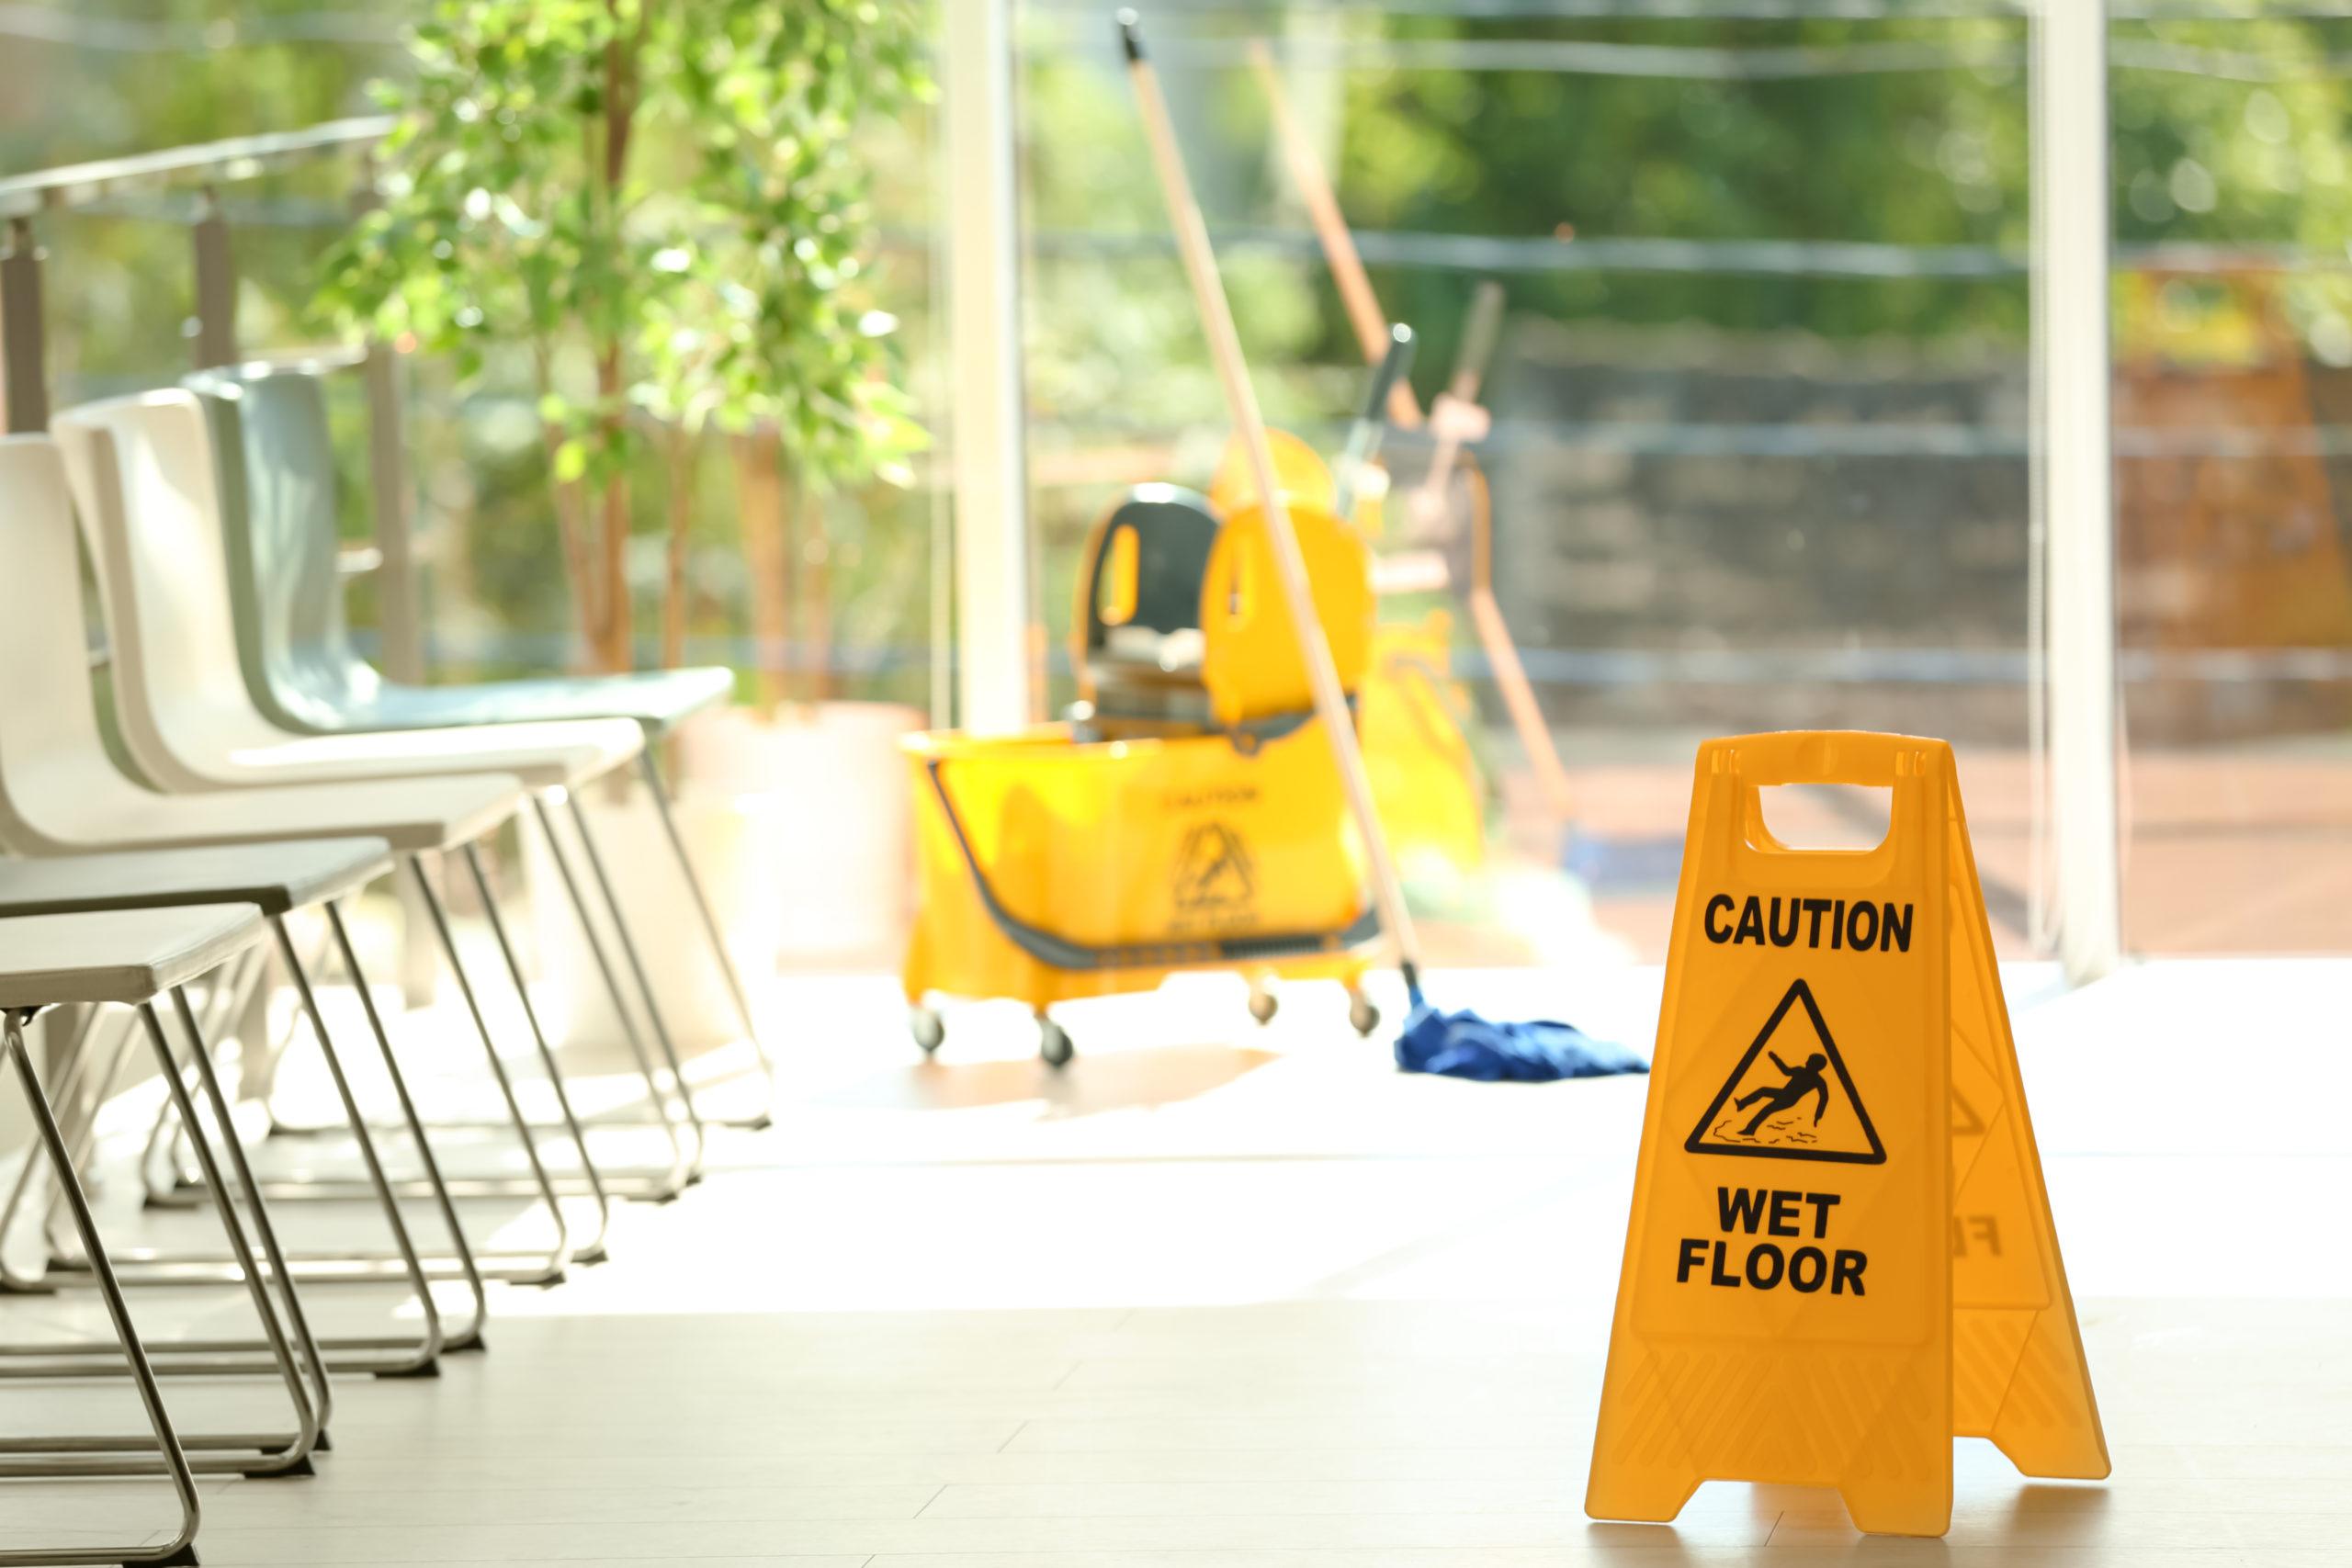 a waiting room with chairs down the left hand side, a mop and mop bucket in the background, and a caution wet floor sign in the foreground